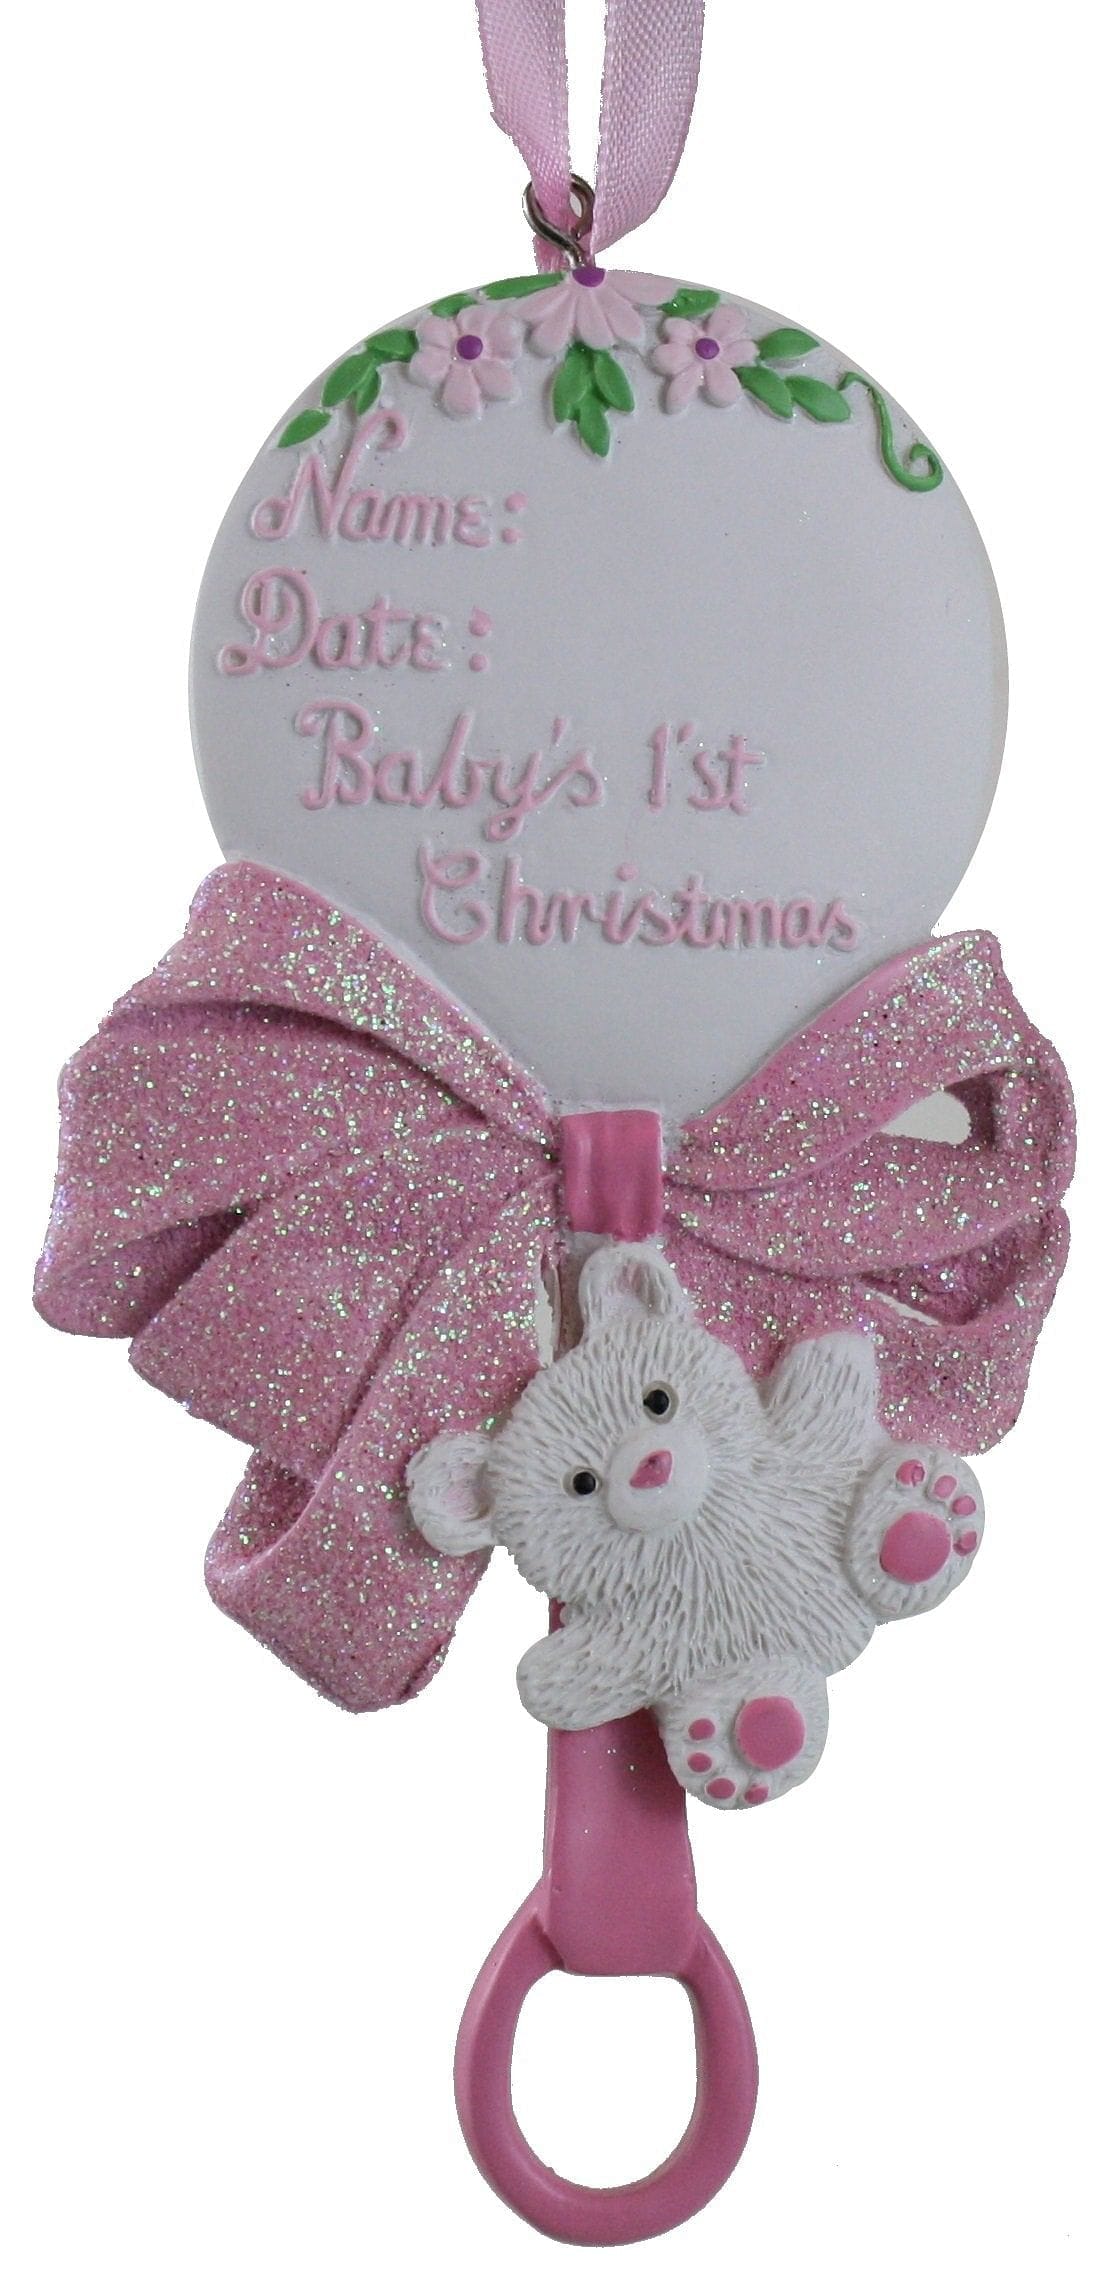 5.5 inch Baby's First Rattle Ornament - Blue - Shelburne Country Store